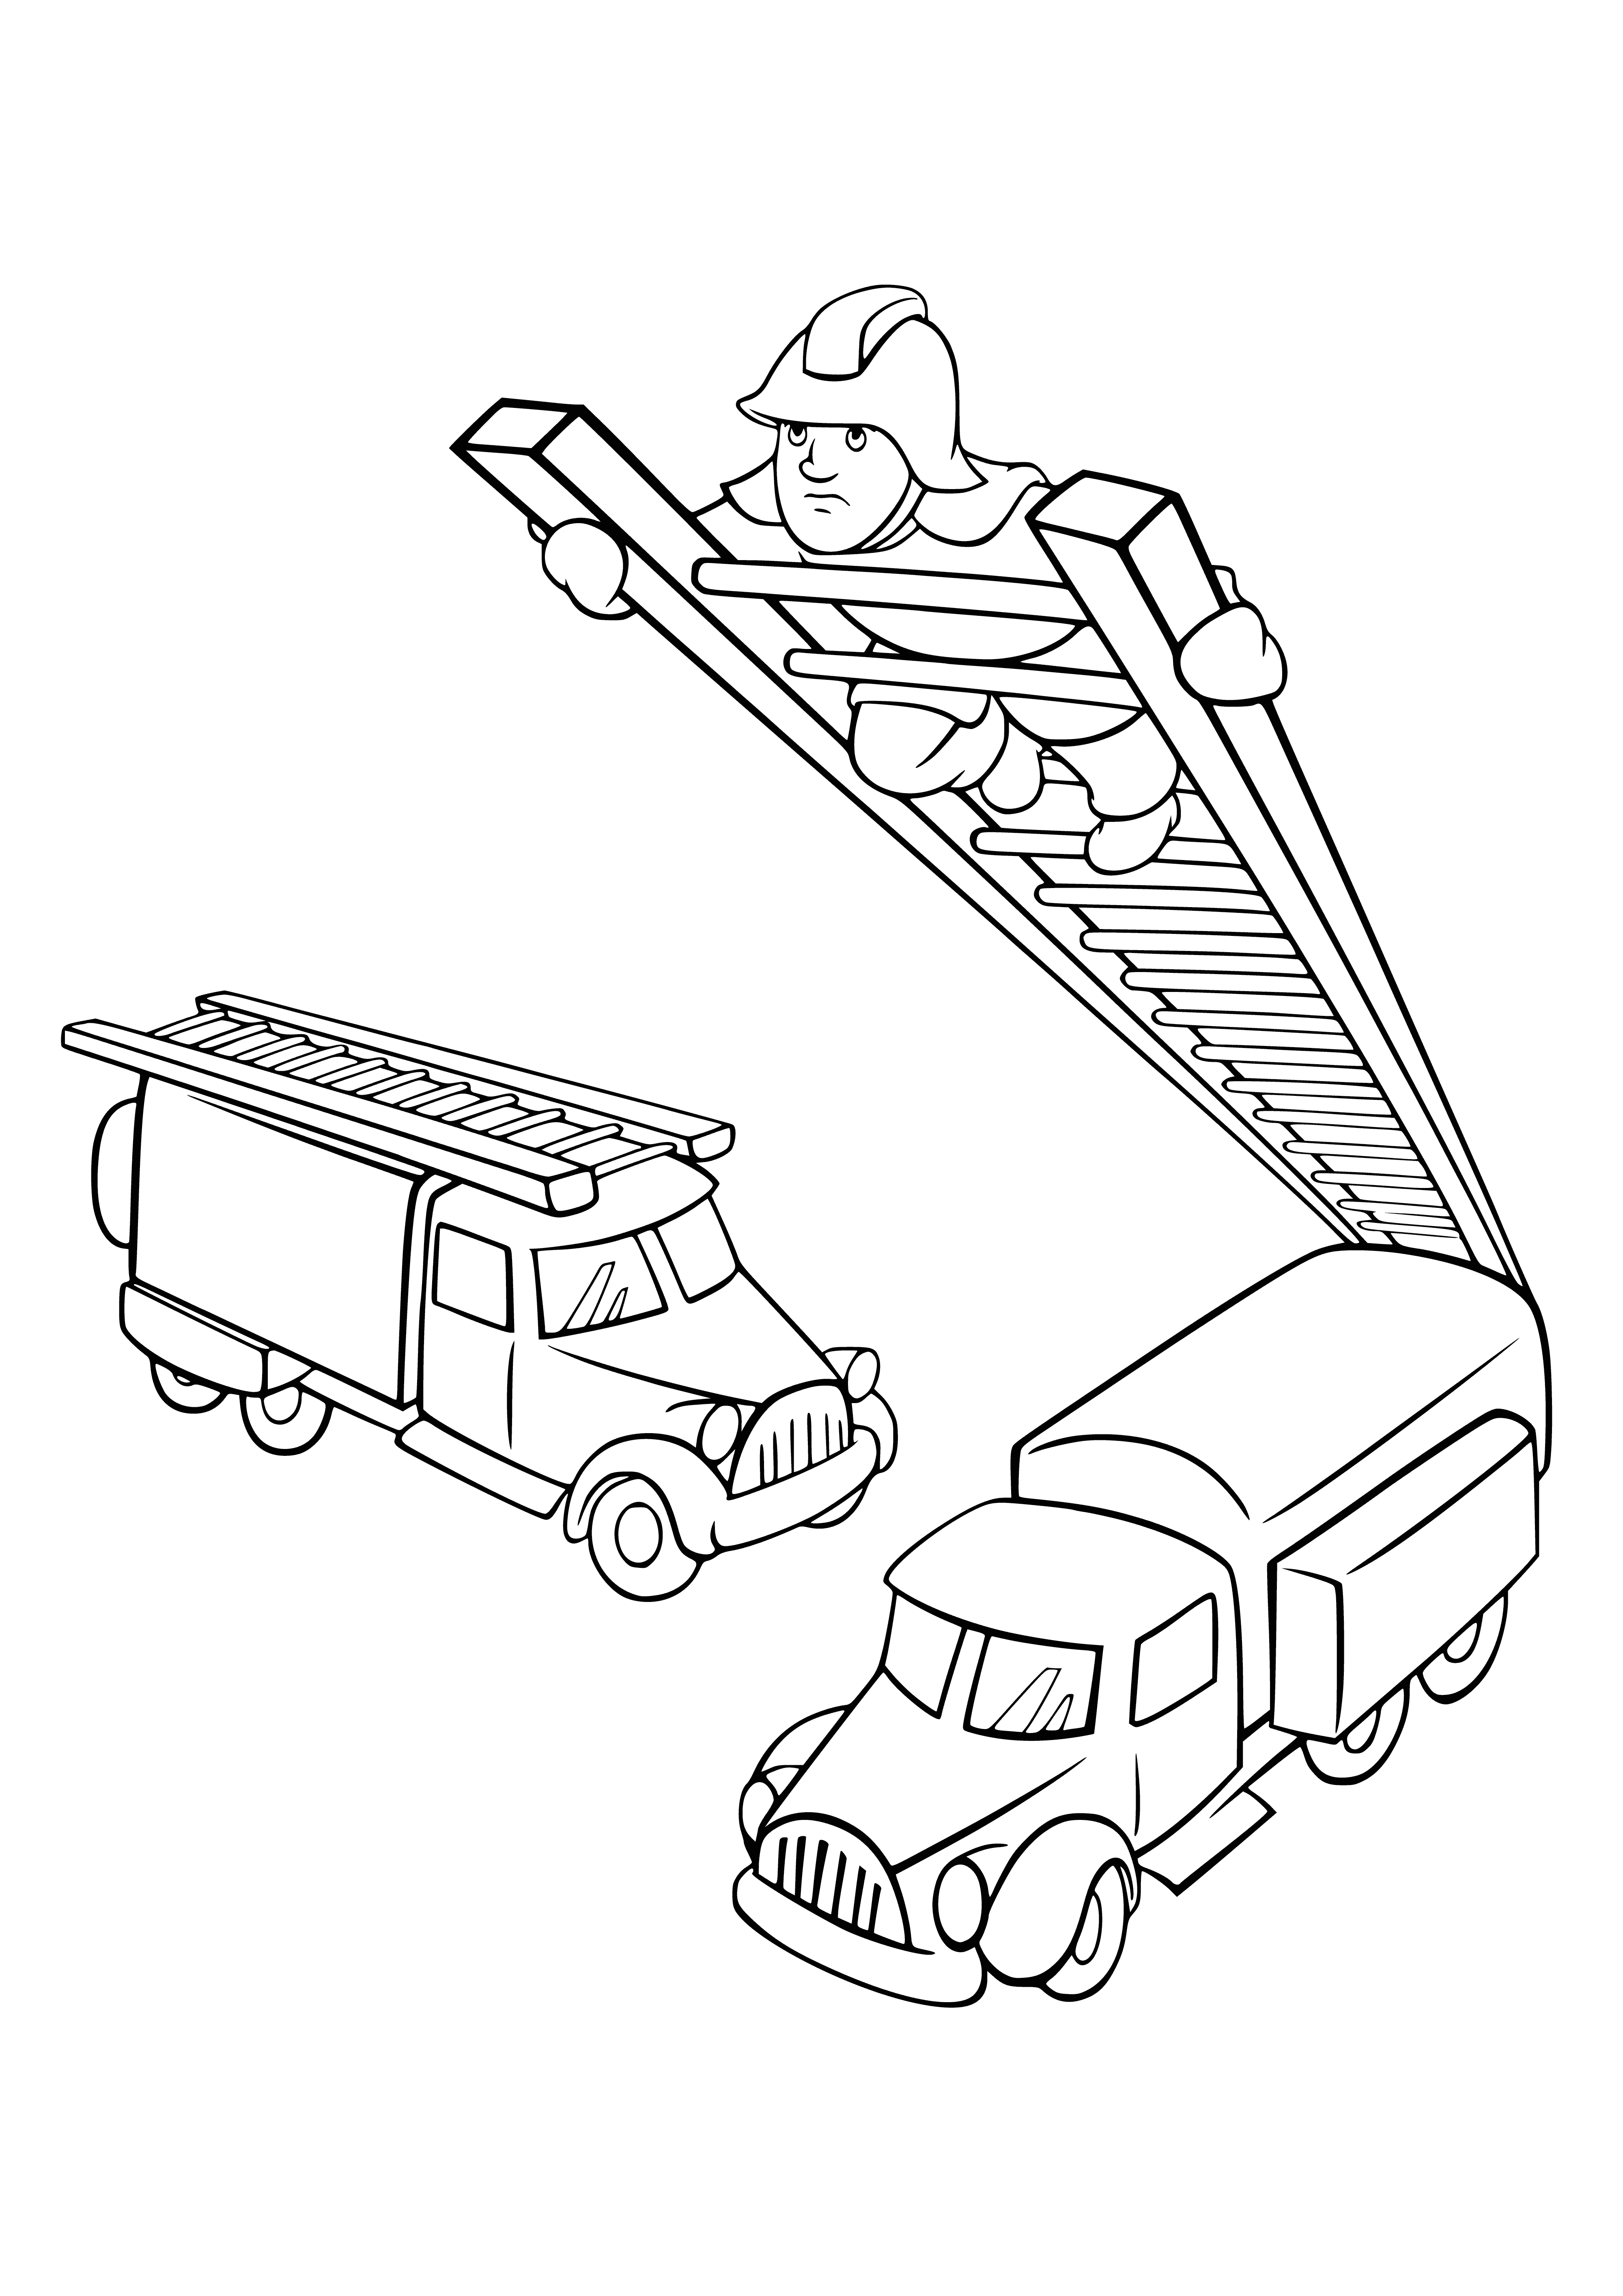 coloring page: Boy sits in driver's seat of fire engine in driveway; Dalmatian sits next to it; 6 red doors open, engine idling.